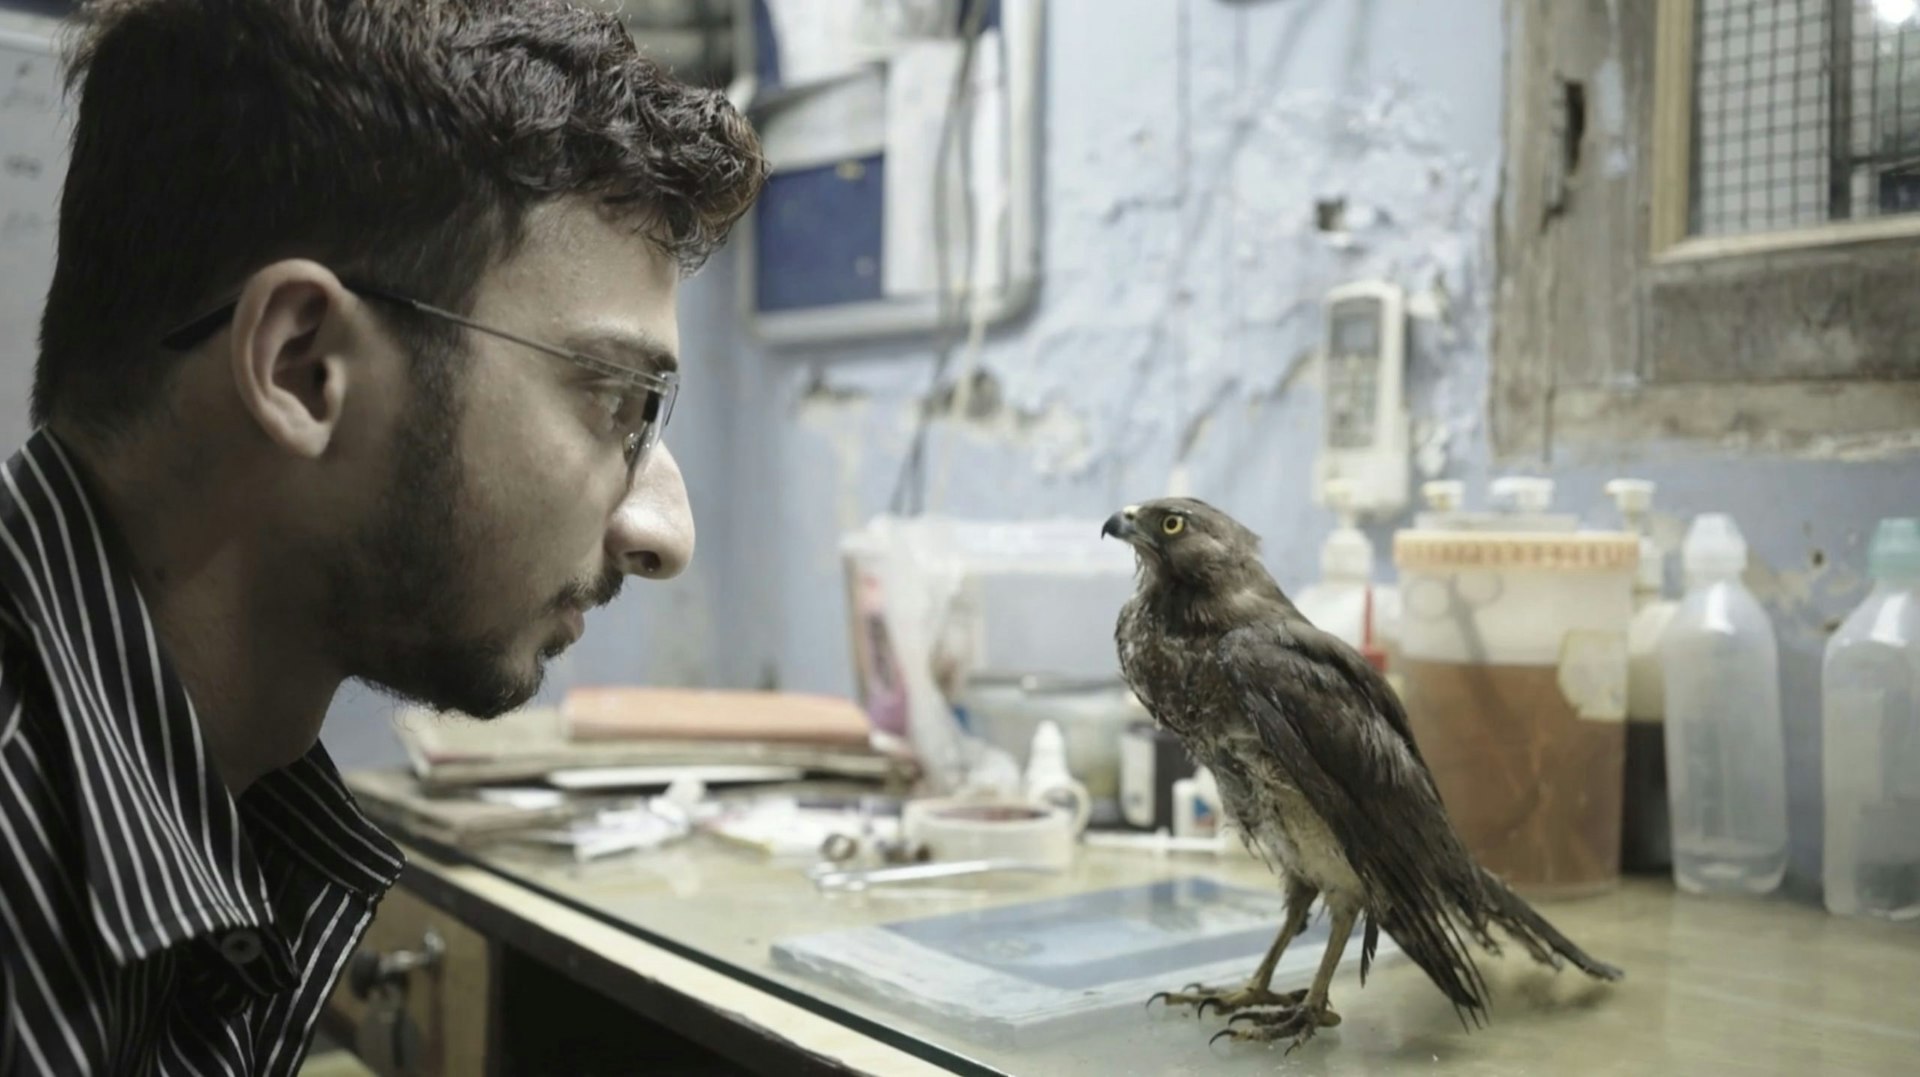 The brothers rescuing Delhi’s birds falling from the sky